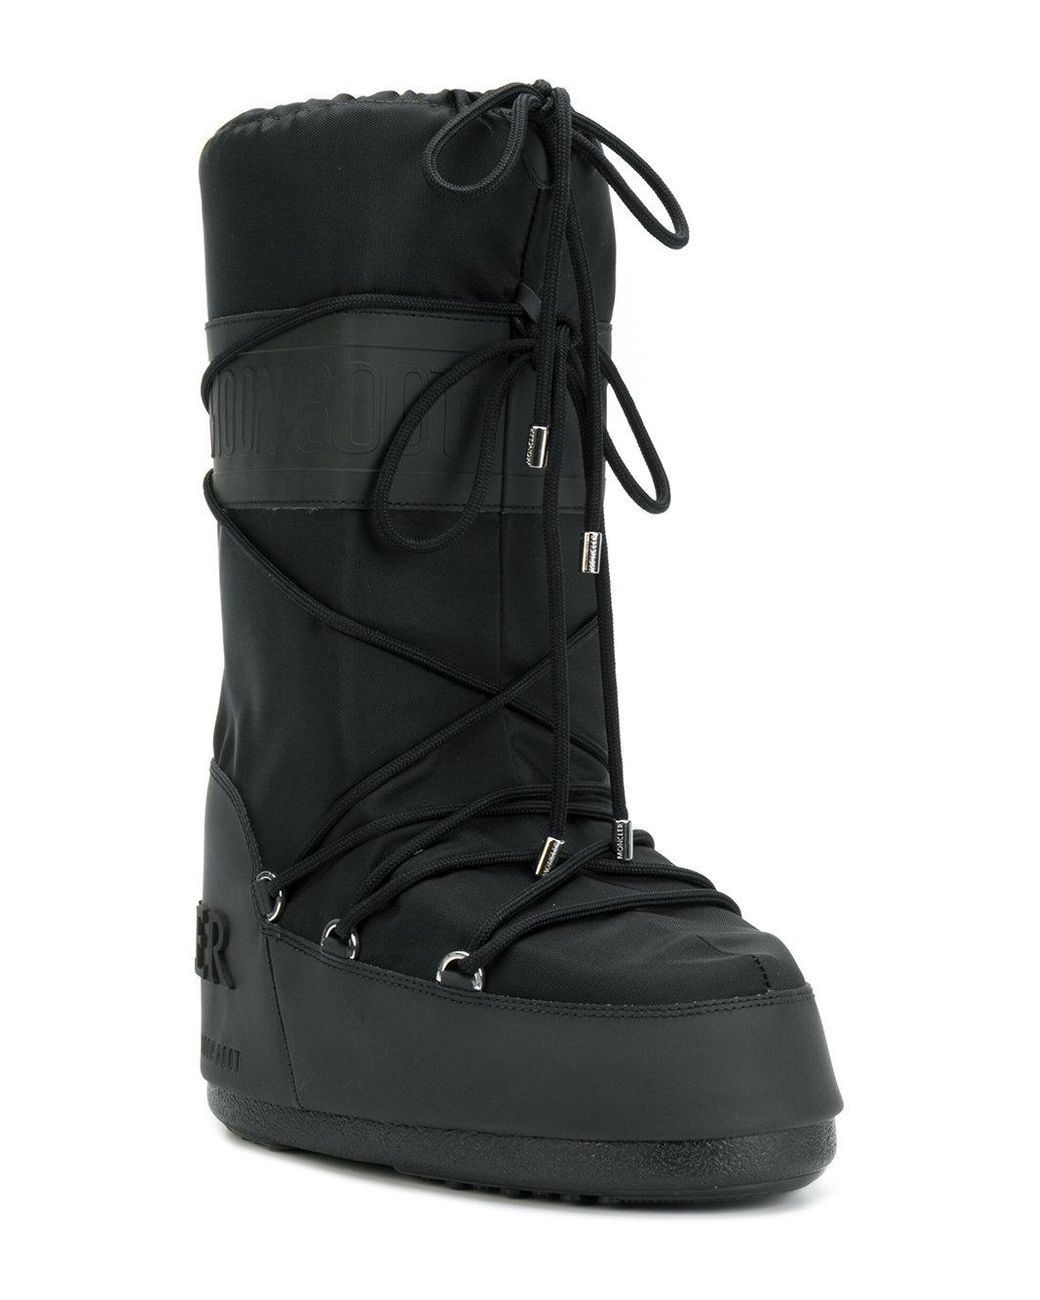 Moncler Venus Moon Boots in Black | Lyst